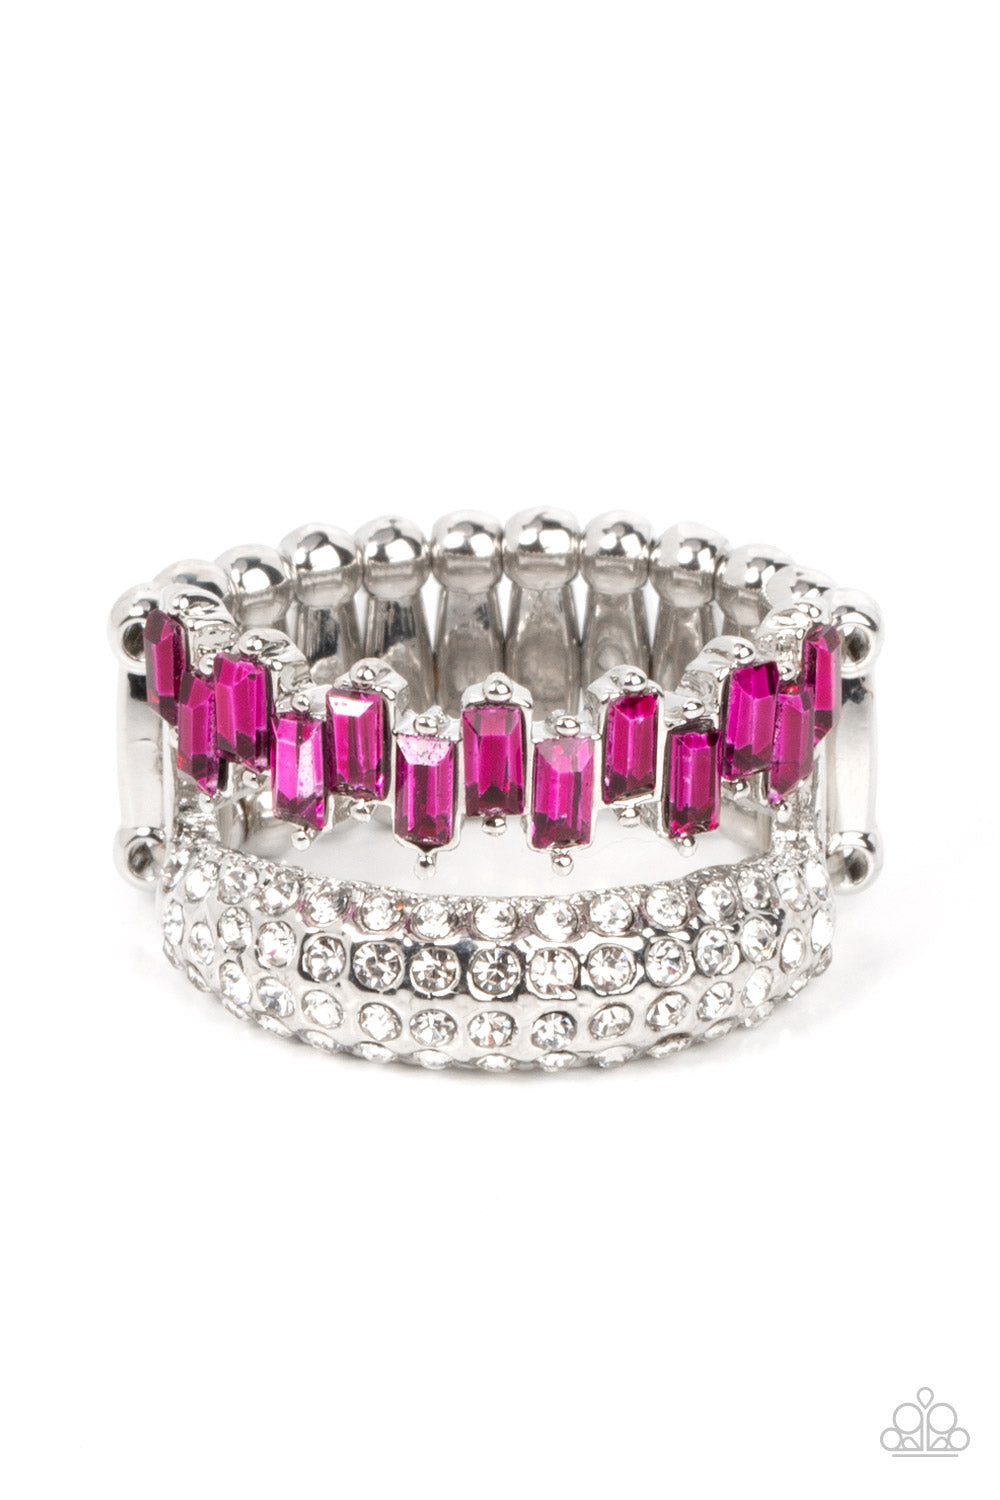 Hold Your CROWN High - pink - Paparazzi ring – JewelryBlingThing